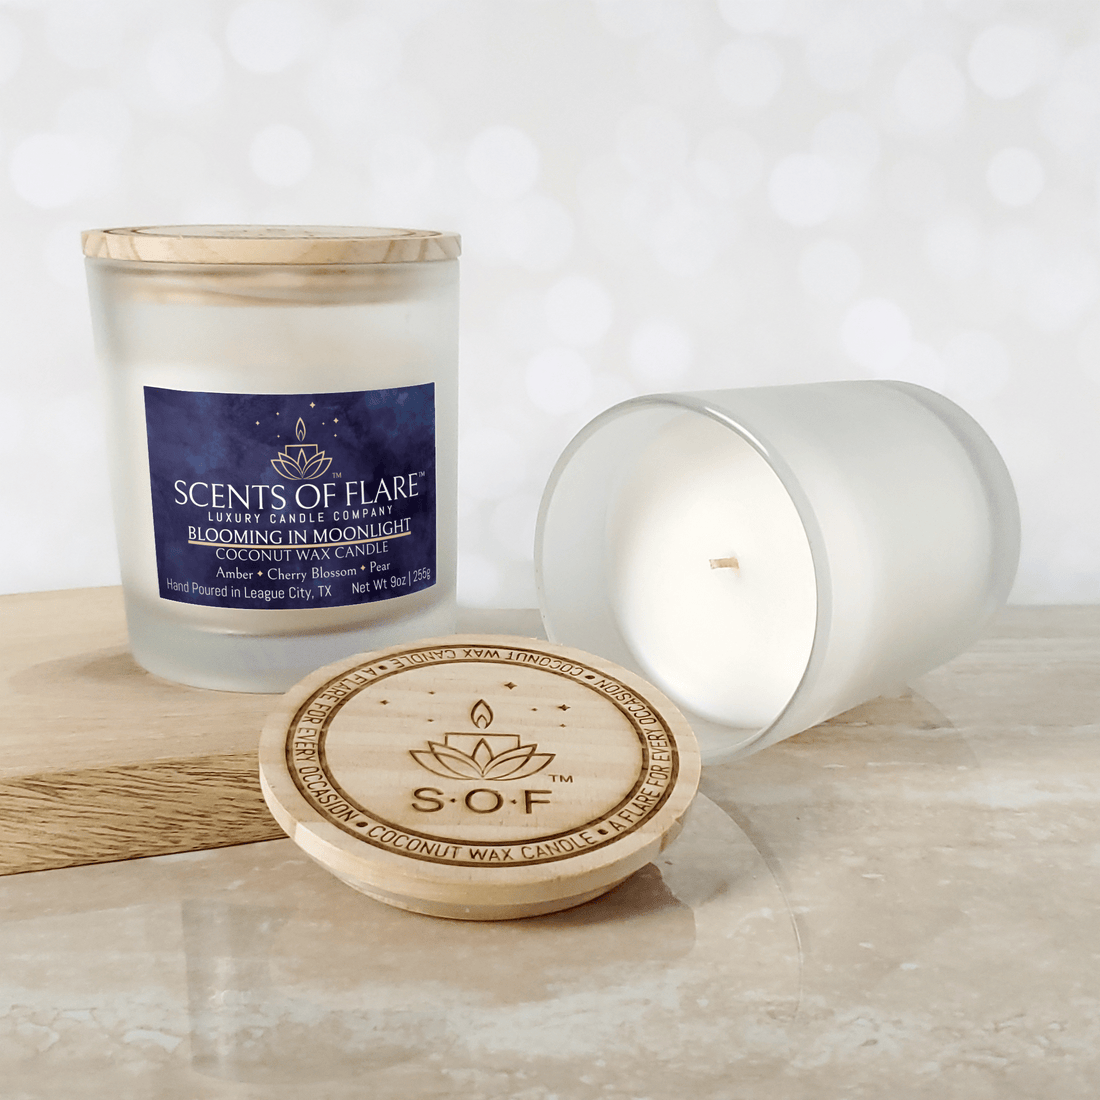 BLOOMING IN MOONLIGHT 9 oz CANDLE - Scents Of Flare